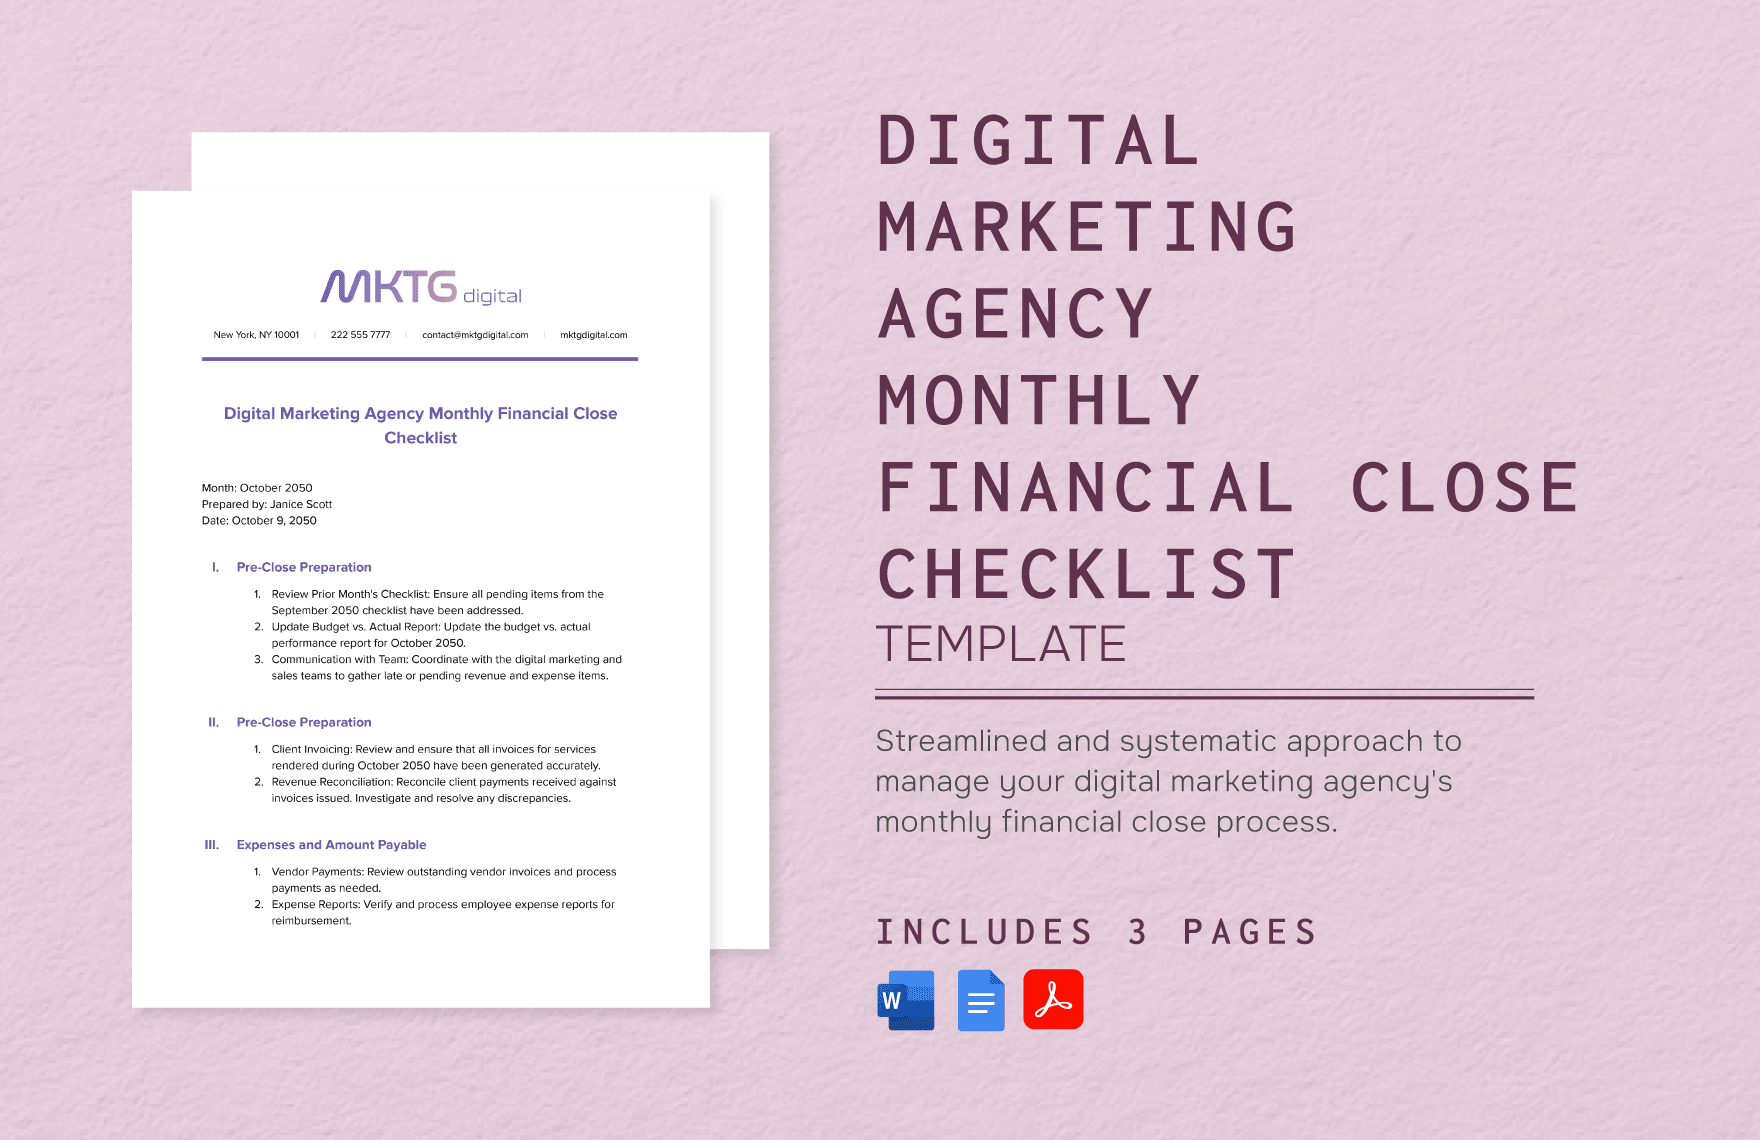 Digital Marketing Agency Monthly Financial Close Checklist Template